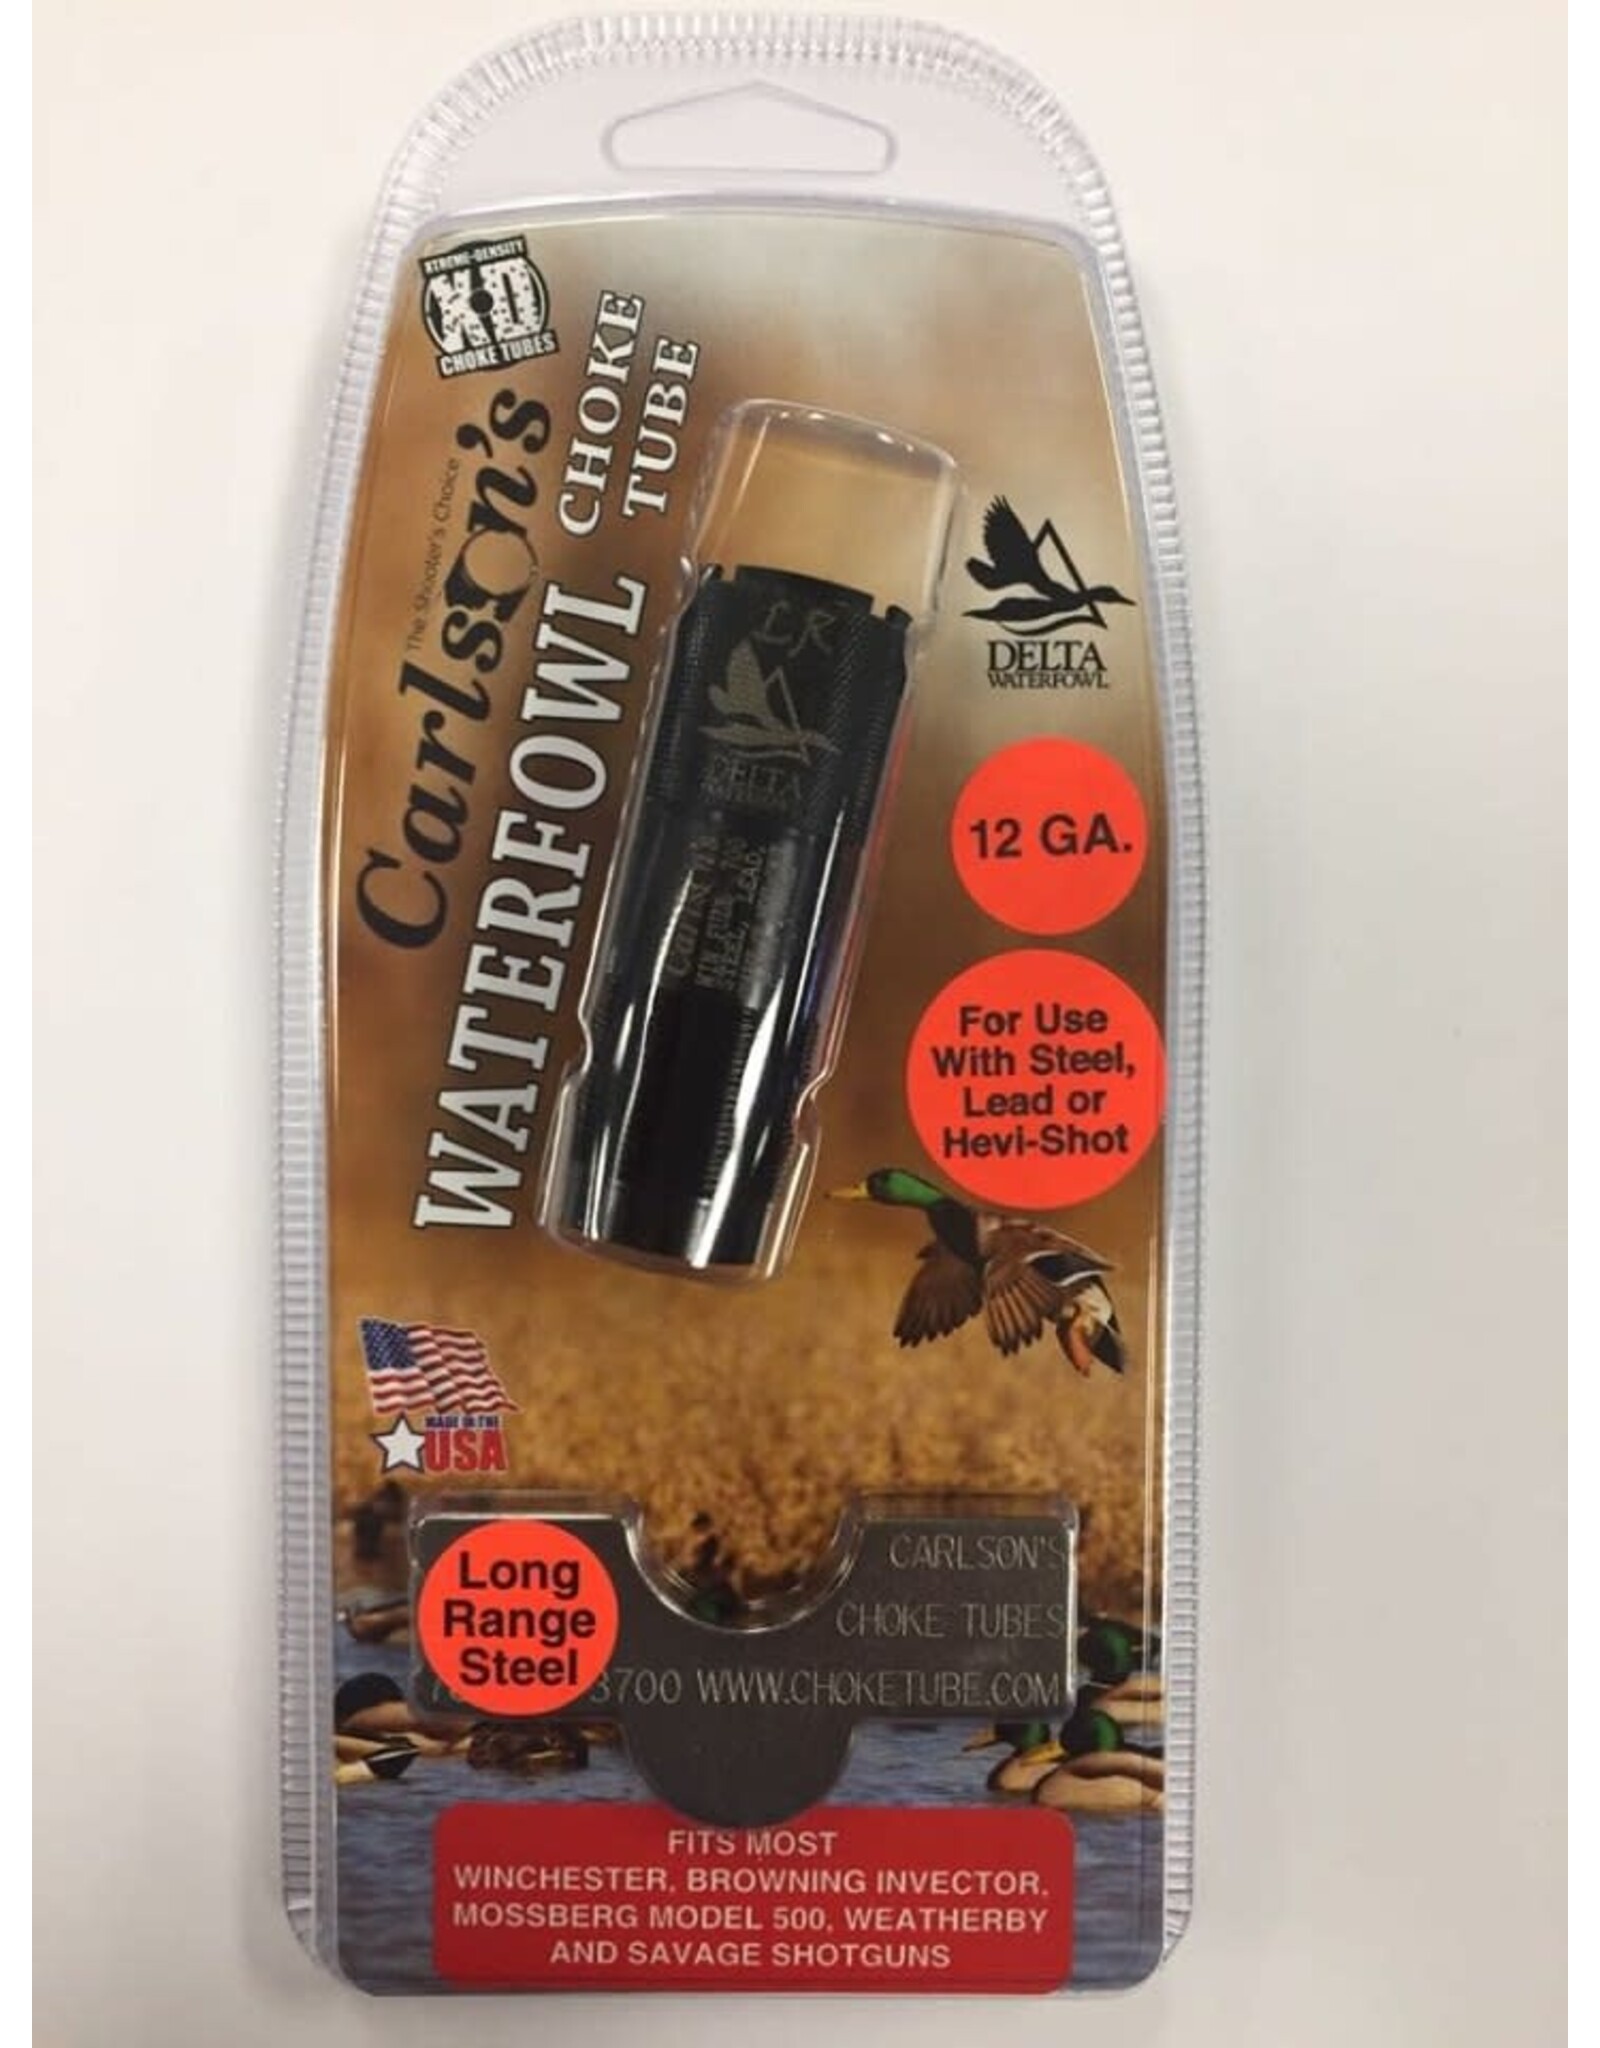 Carlson's Choke Tubes Carlson's Waterfowl Choke Tube - Winchester, Browning Invector, Mossberg 500, Weatherby & Savage